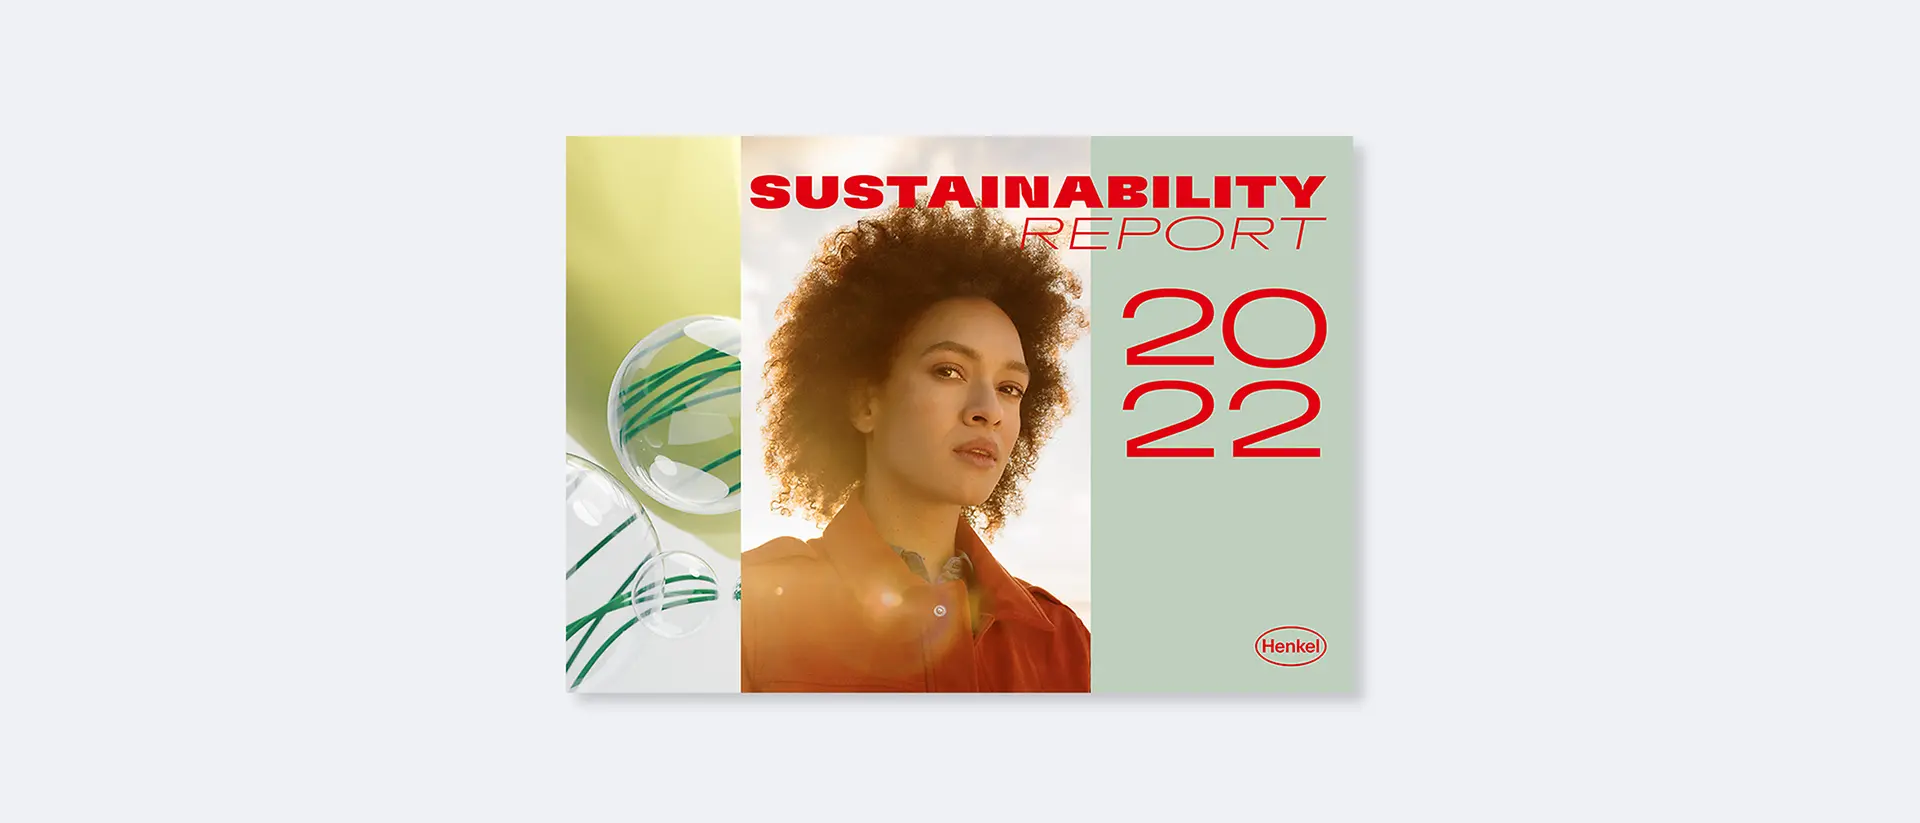 Teaser Sustainability Report 2022